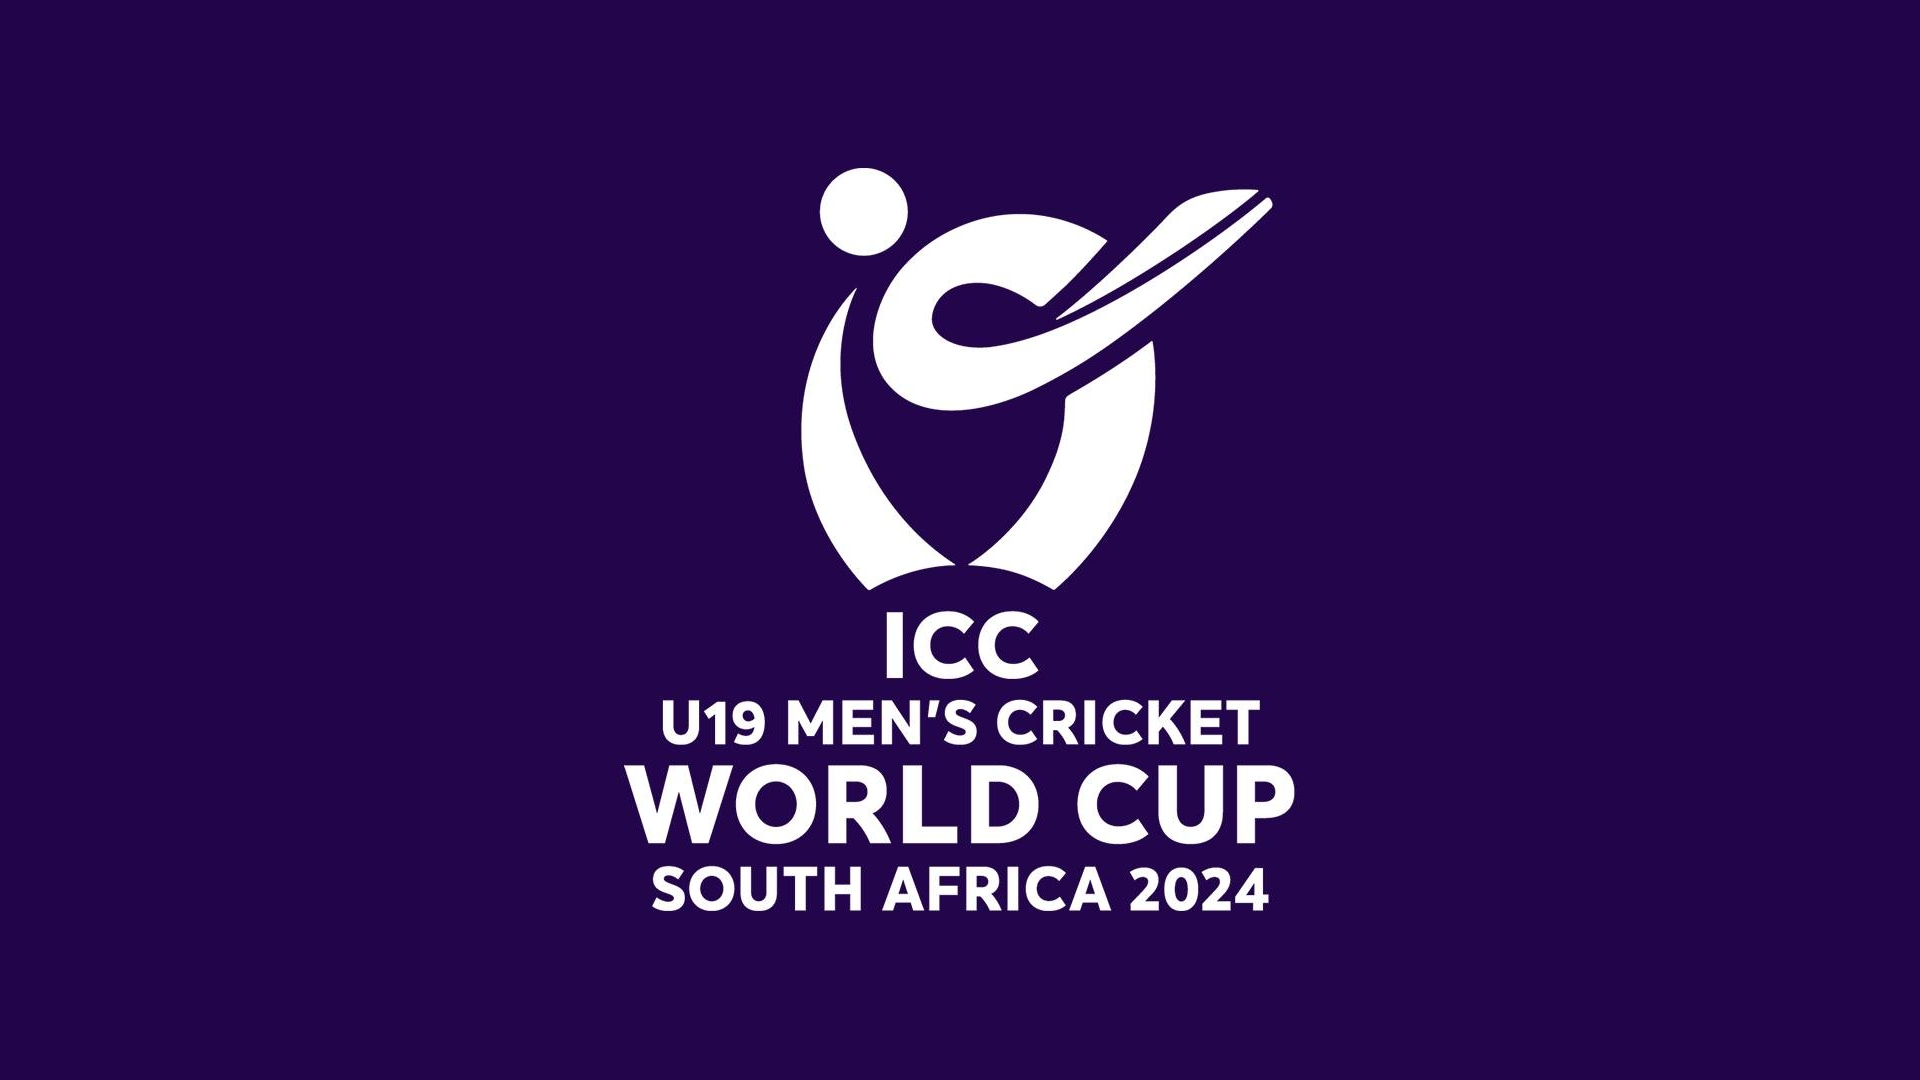 ICC U19 Cricket World Cup 2024 Groups, Schedule, Live Broadcasting